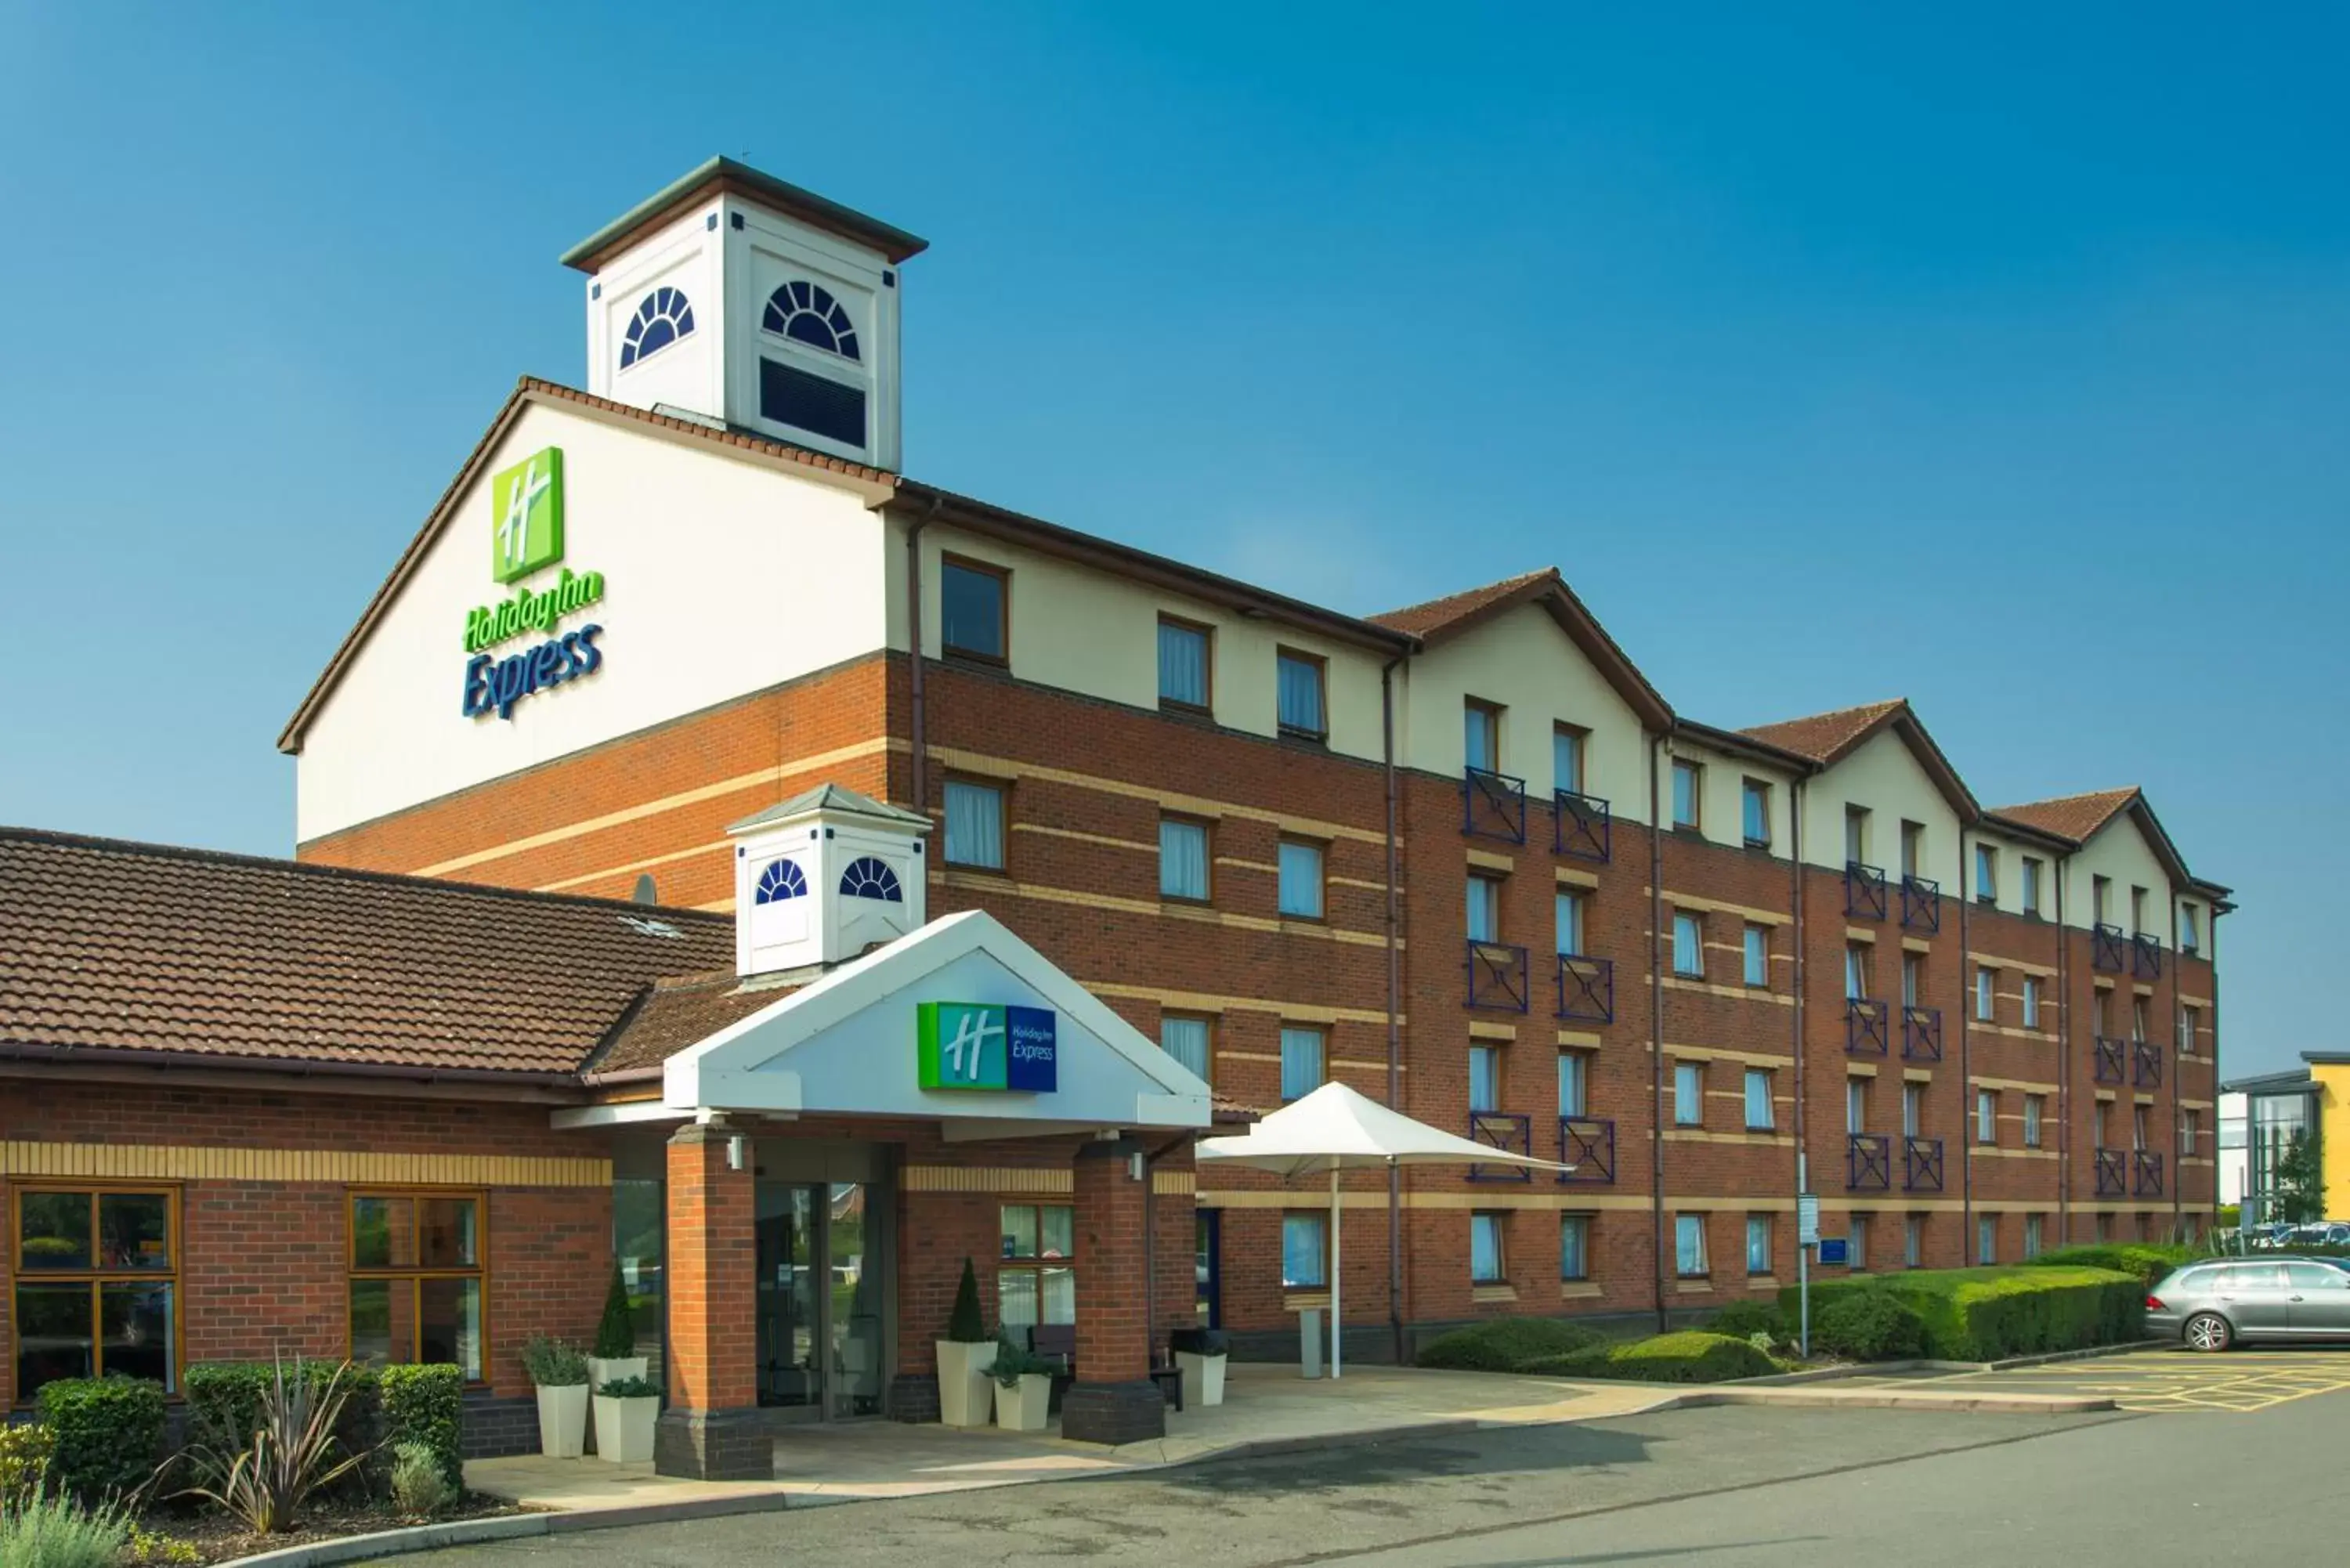 Property building in Holiday Inn Express Derby Pride Park, an IHG Hotel